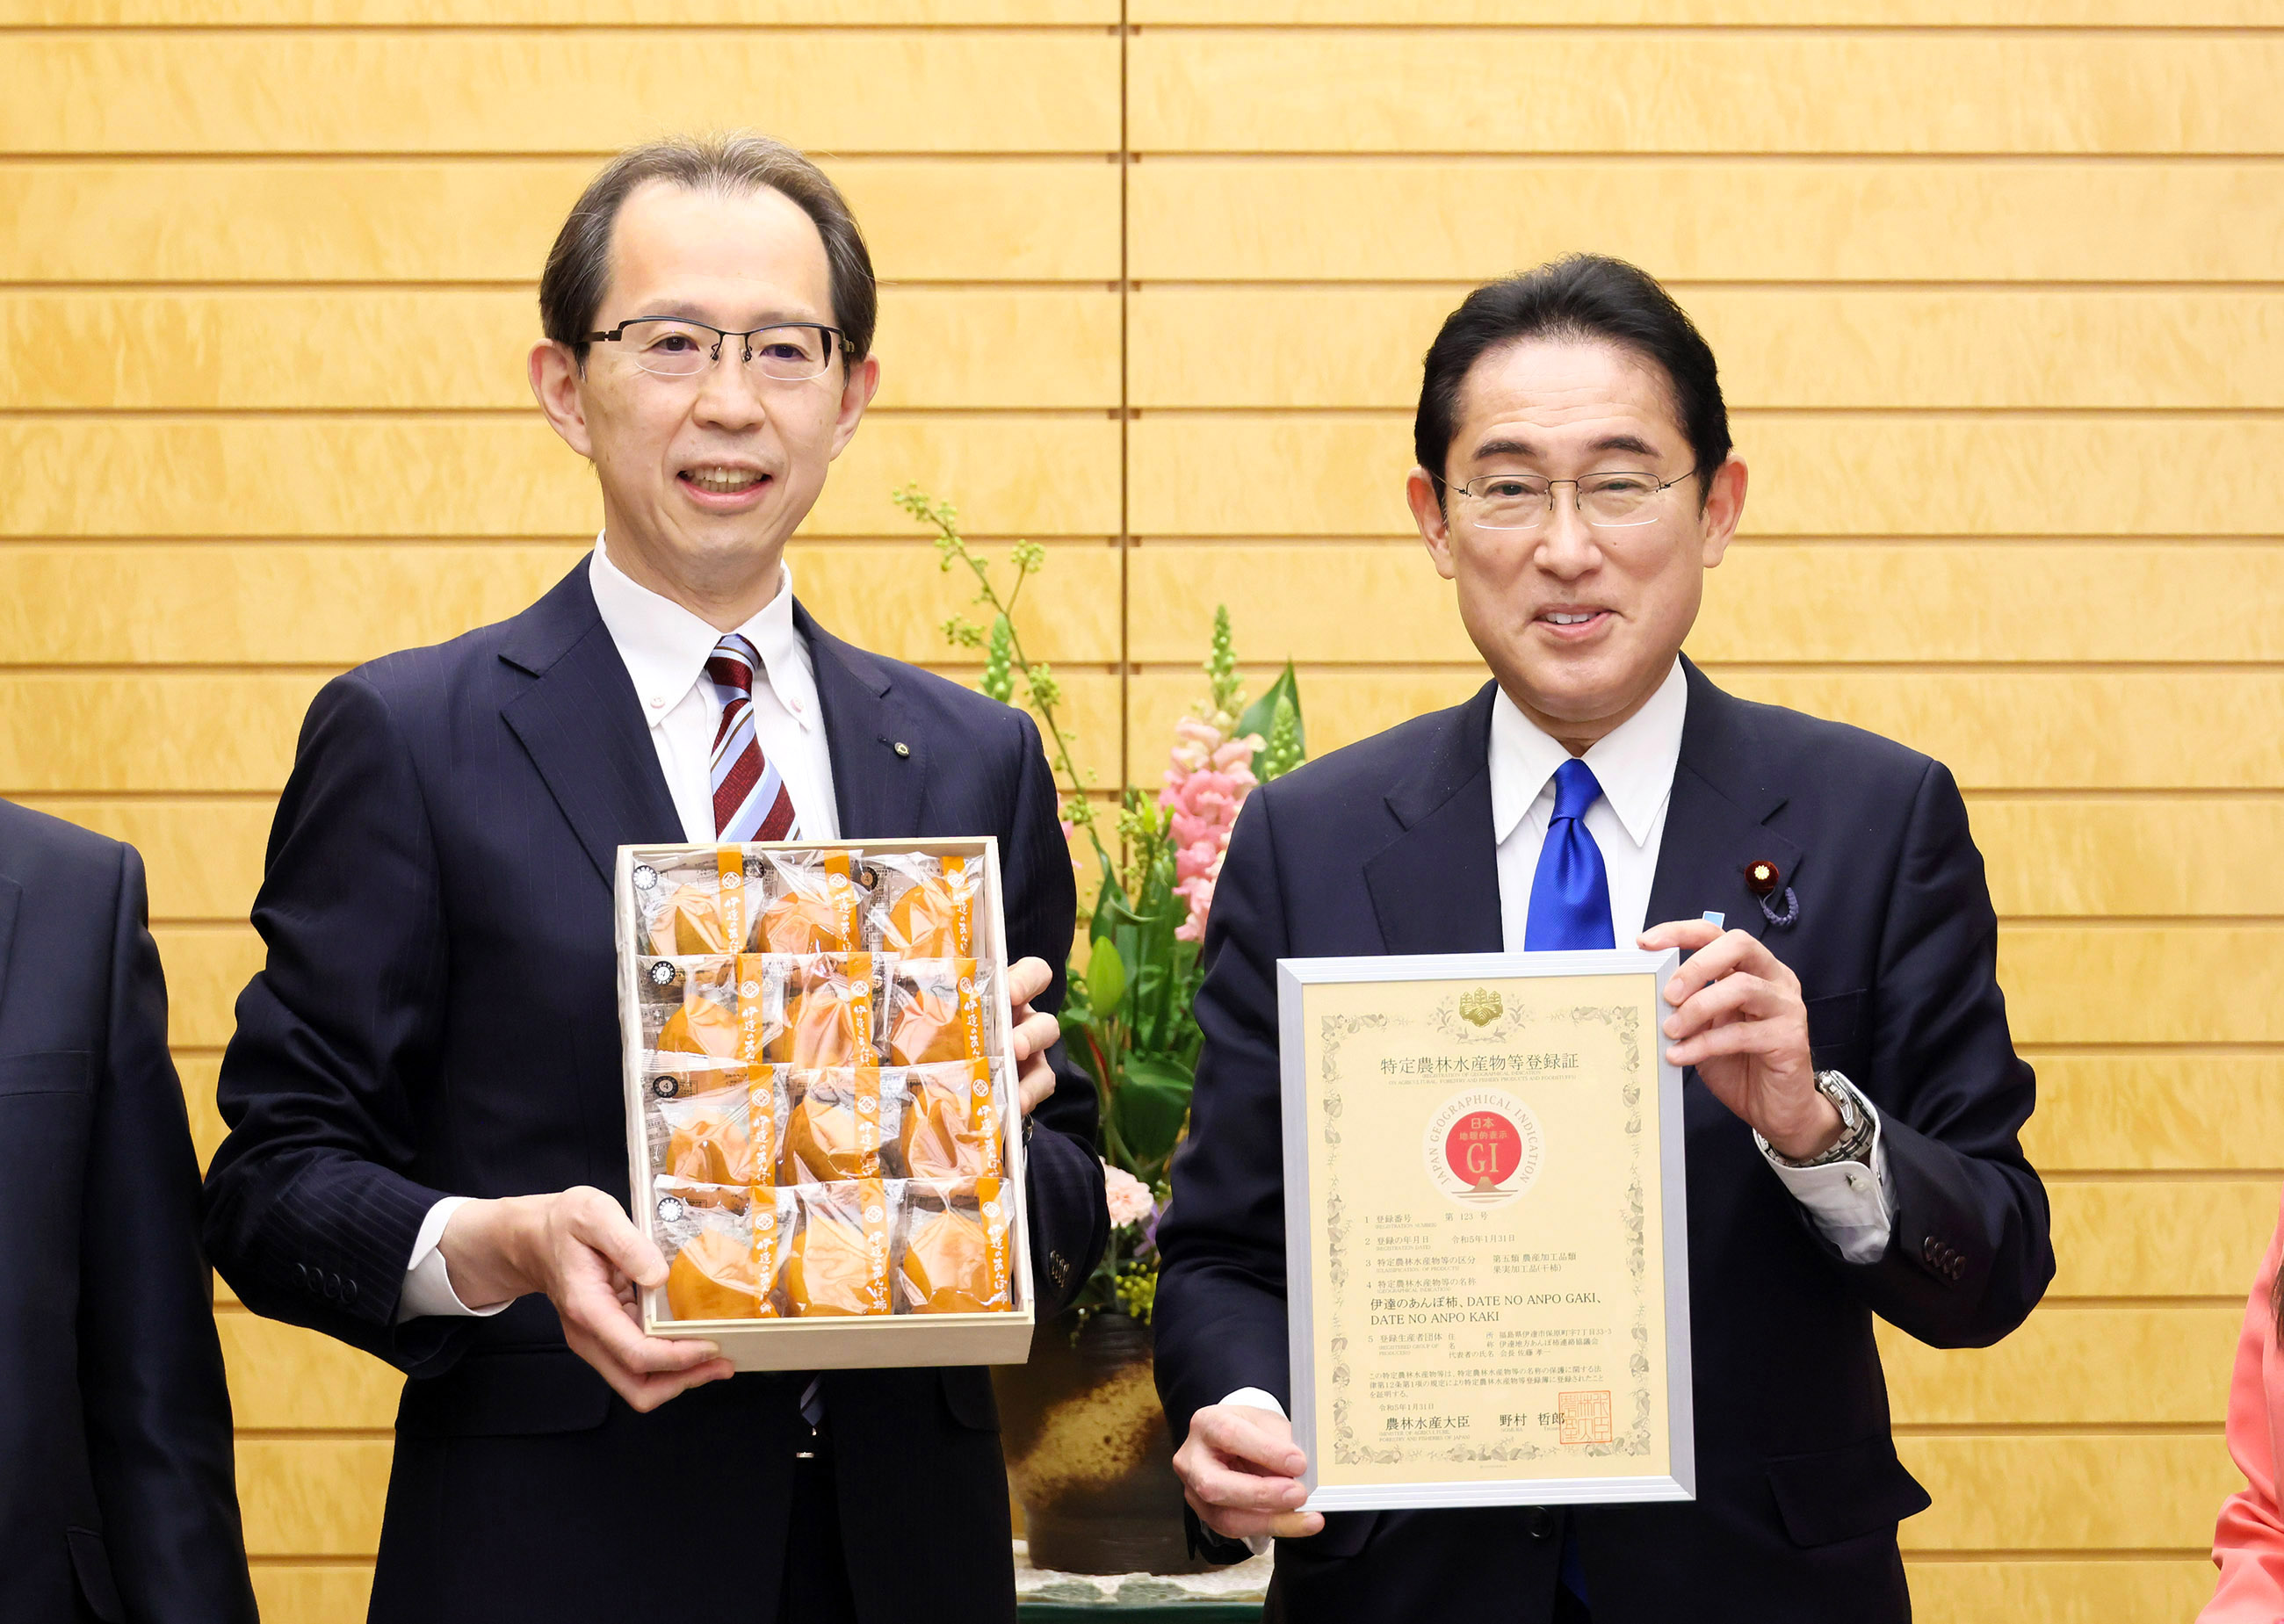 Presentation of Anpo Persimmons by and Courtesy Call from the Governor of Fukushima Prefecture and Others